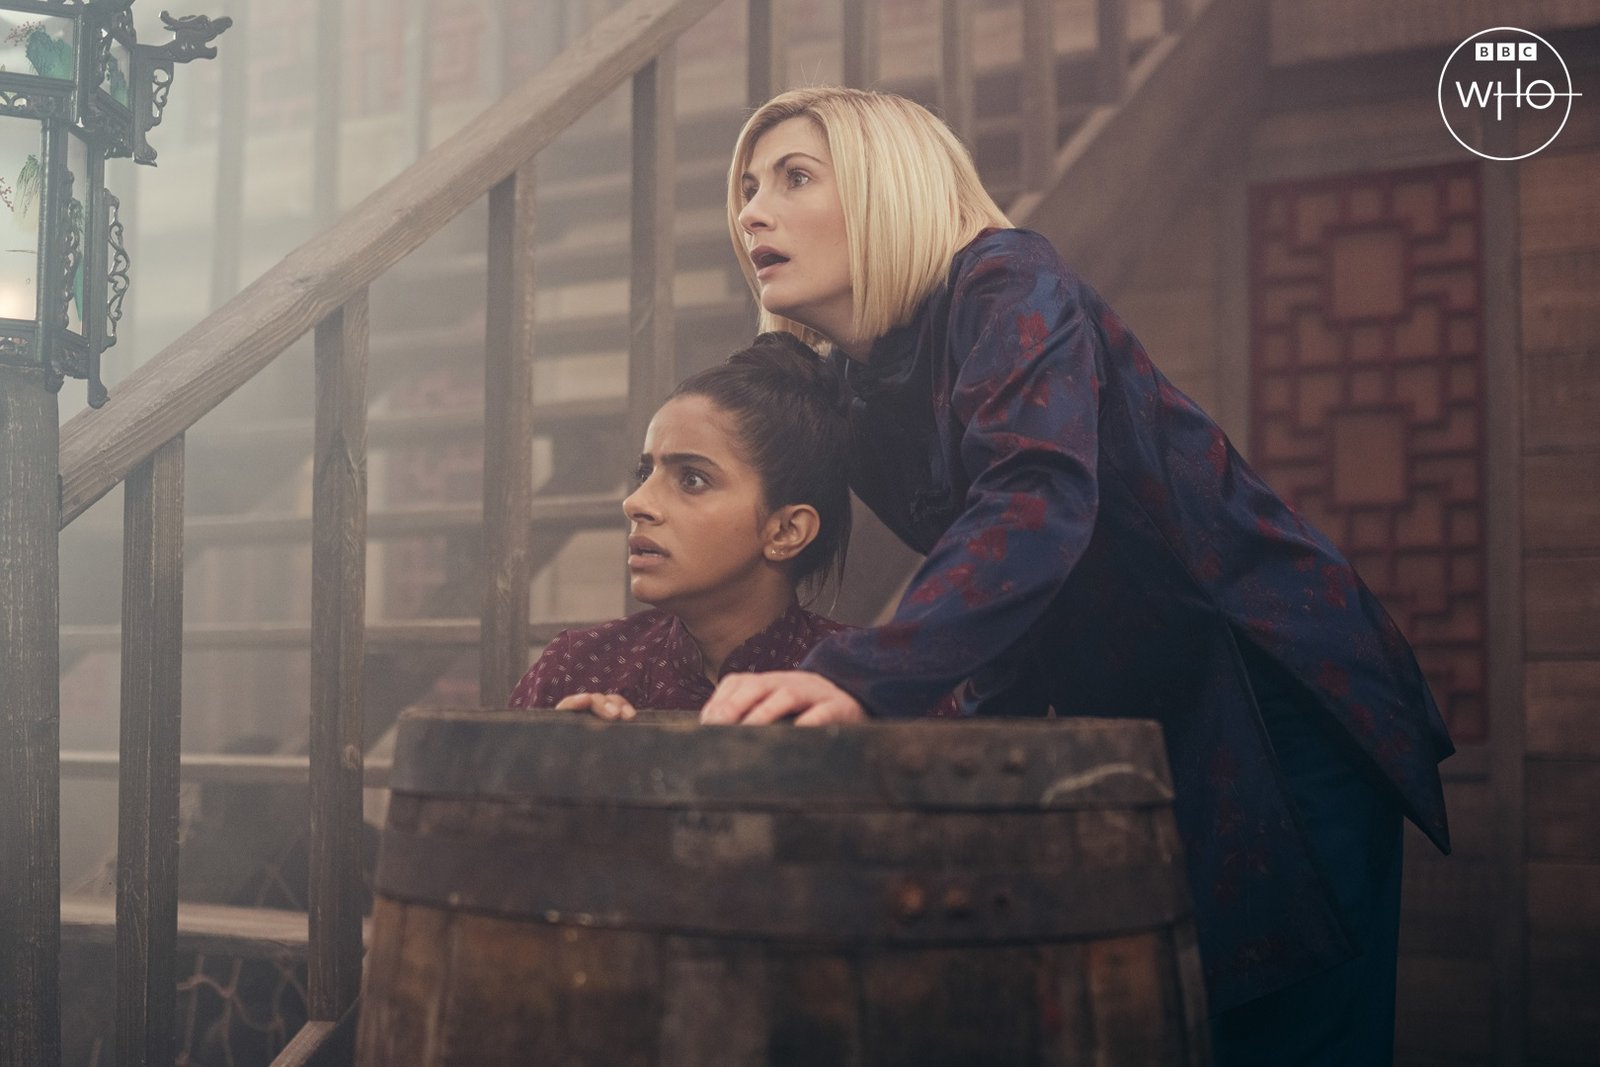 What Did Jodie Whittaker and Mandip Gill Take from the TARDIS Set?